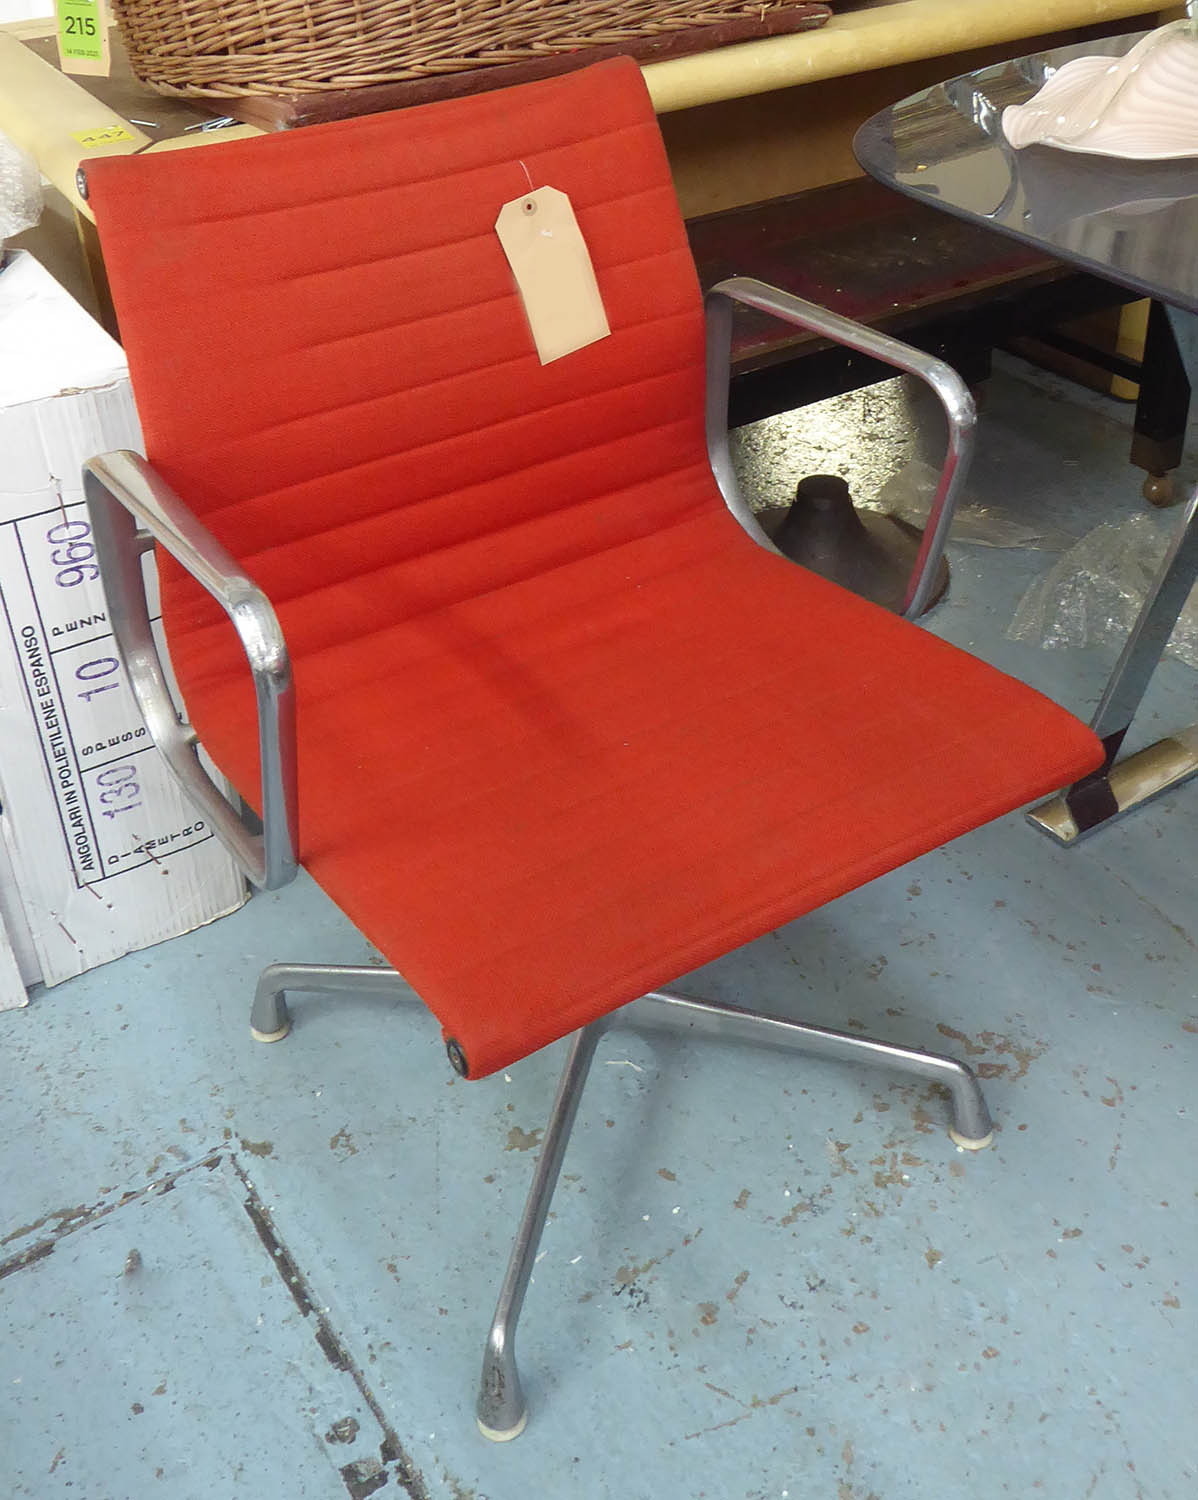 HERMAN MILLER ALUMINIUM GROUP CHAIR BY CHARLES AND RAY EAMES, 83cm H.